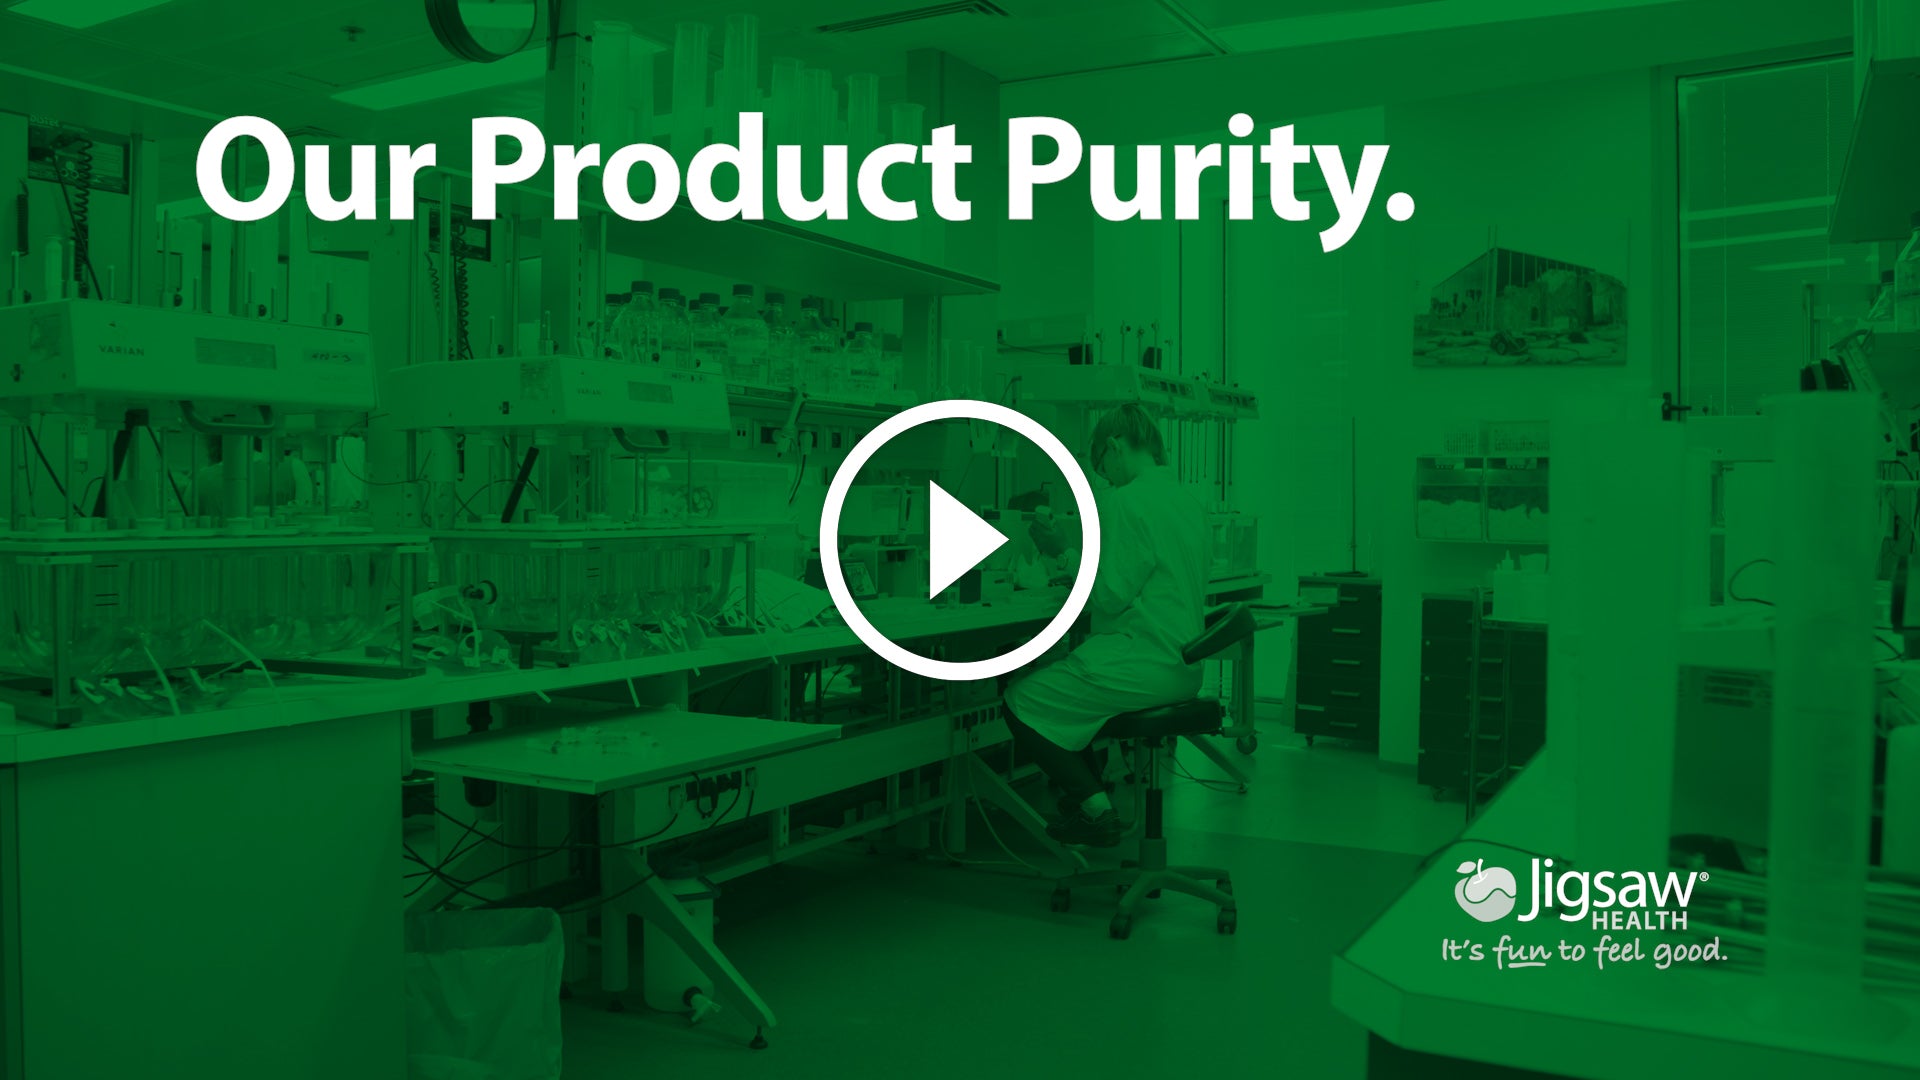 Our Product Purity